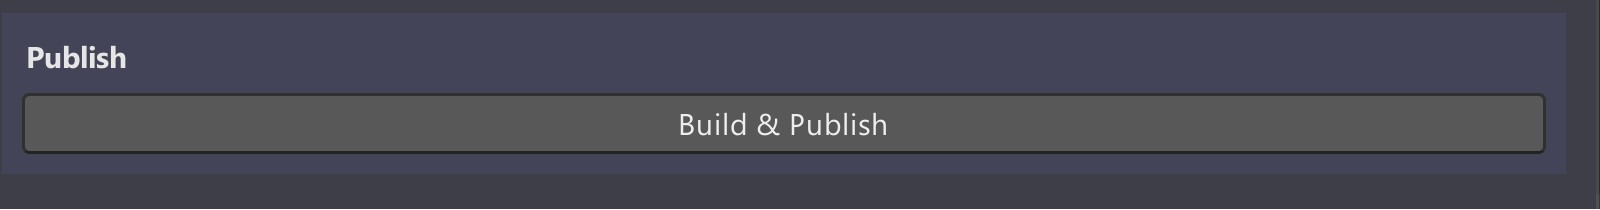 A screen shot of the lower part of the Mesh Uploader window highlighting the Build & Publish button